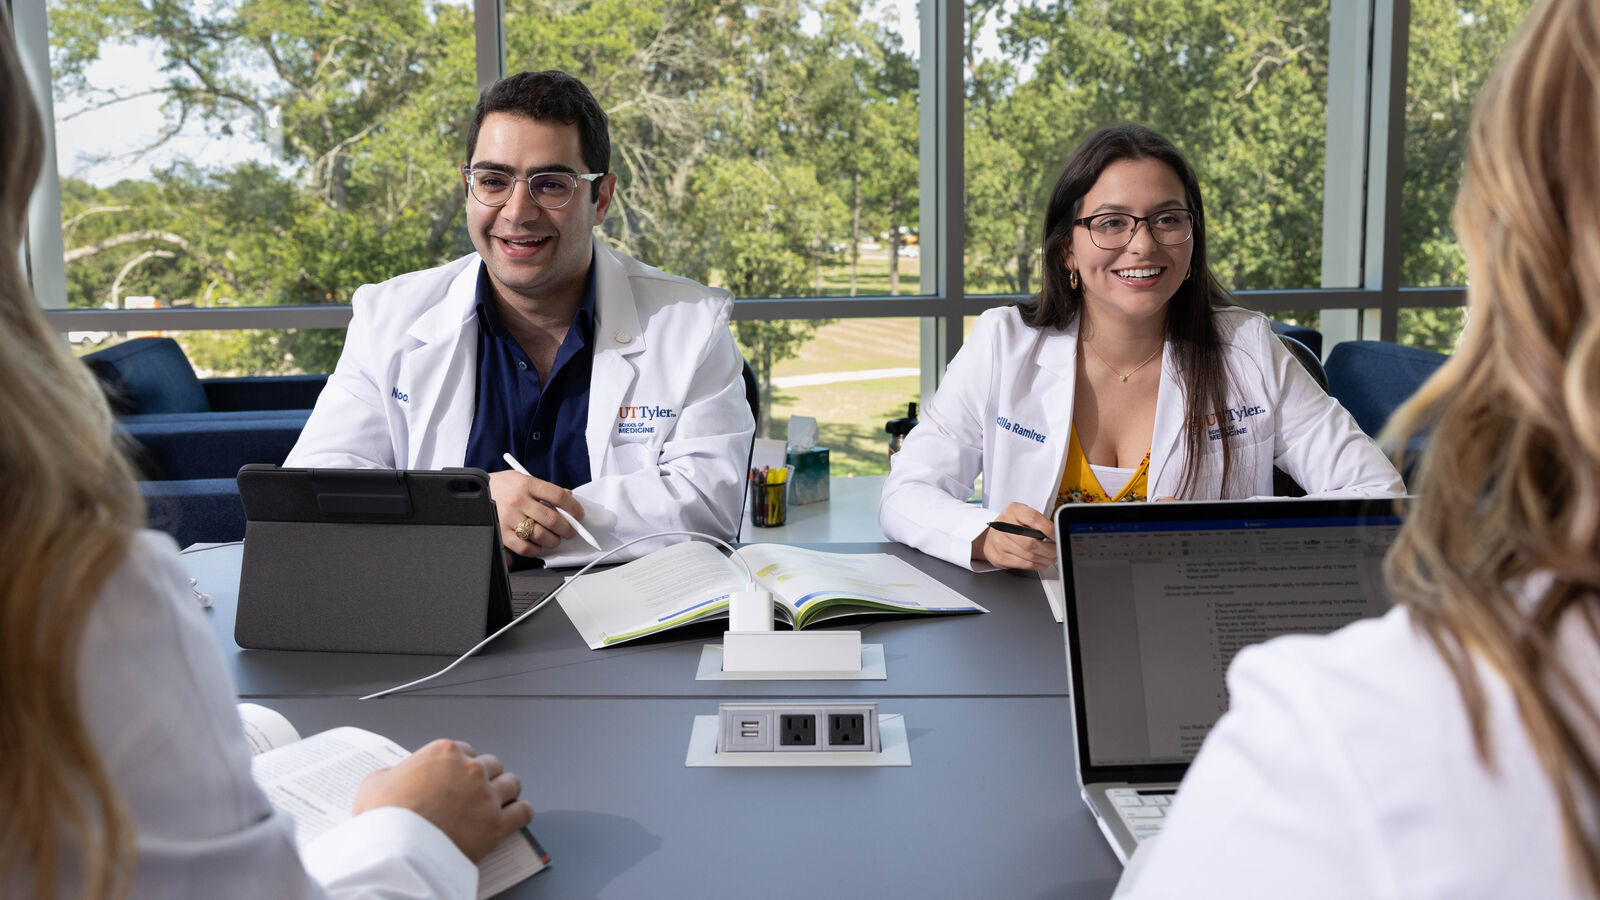 UT Tyler School of Medicine students in lab coats sit around a table with laptops